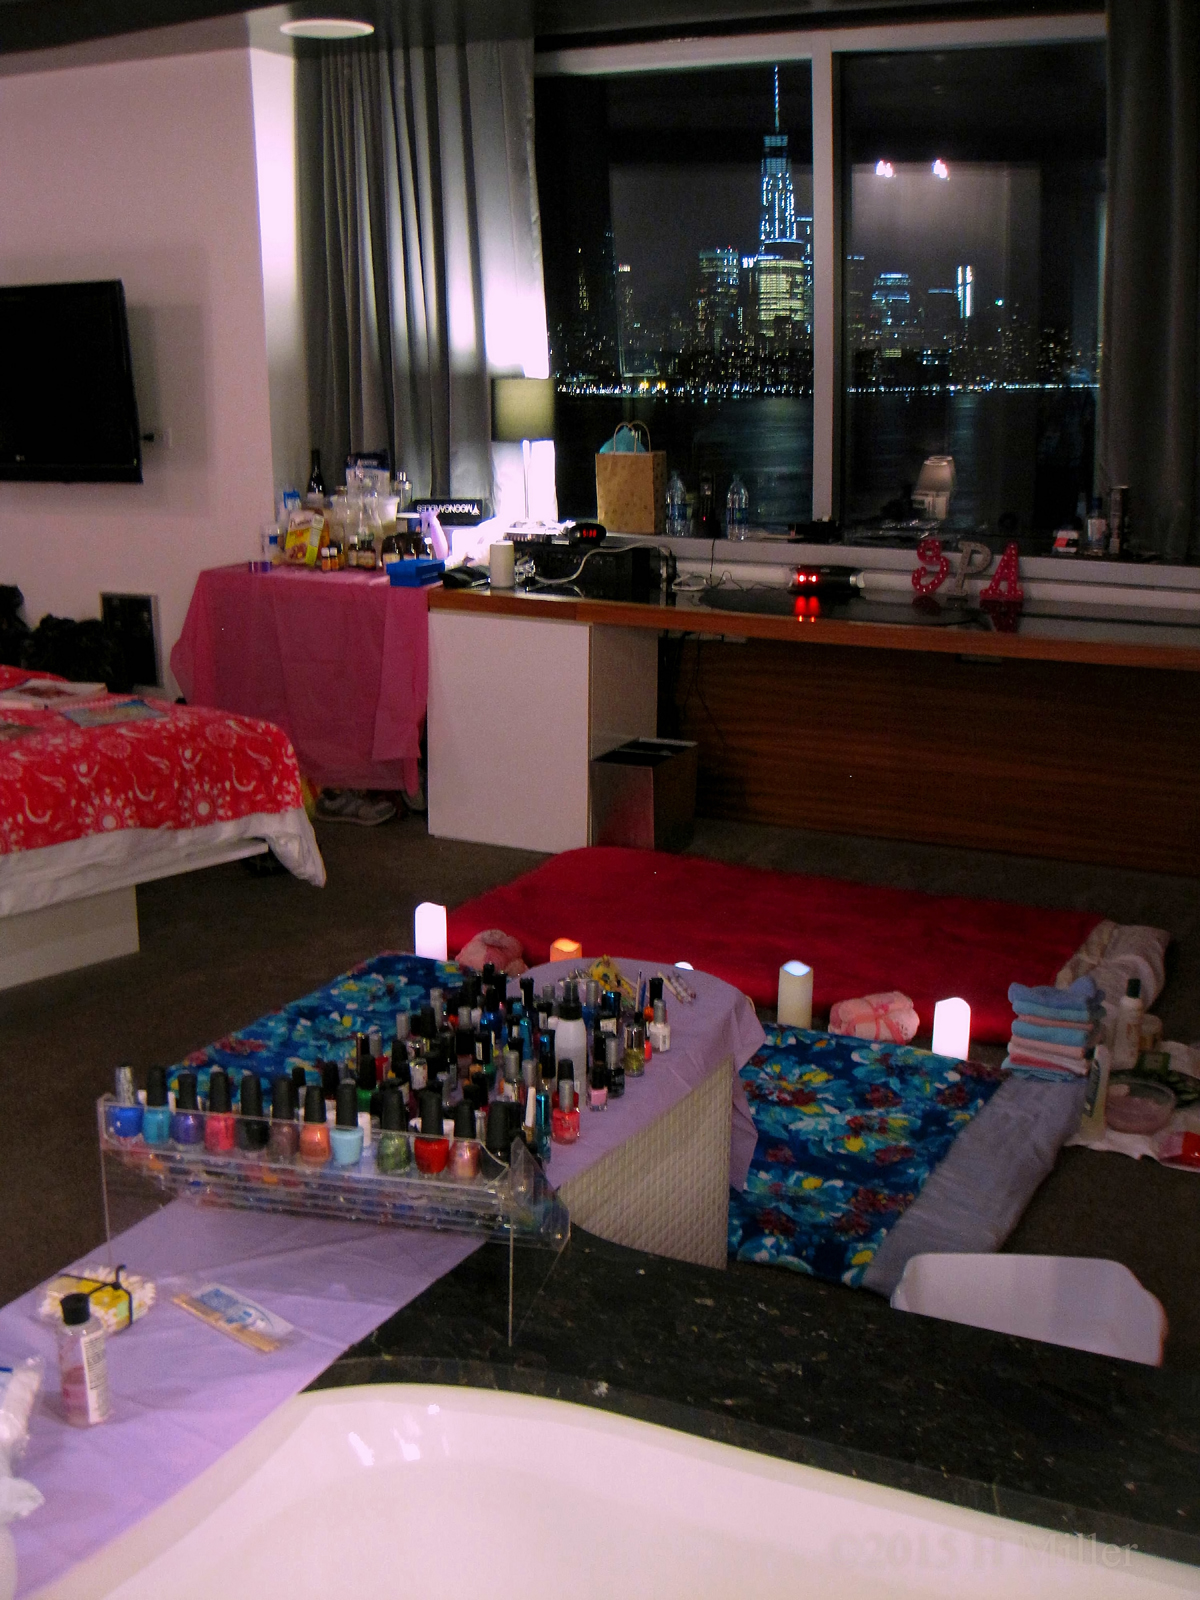 Kids Hotel Spa Party In New Jersey With View Of NYC!! 